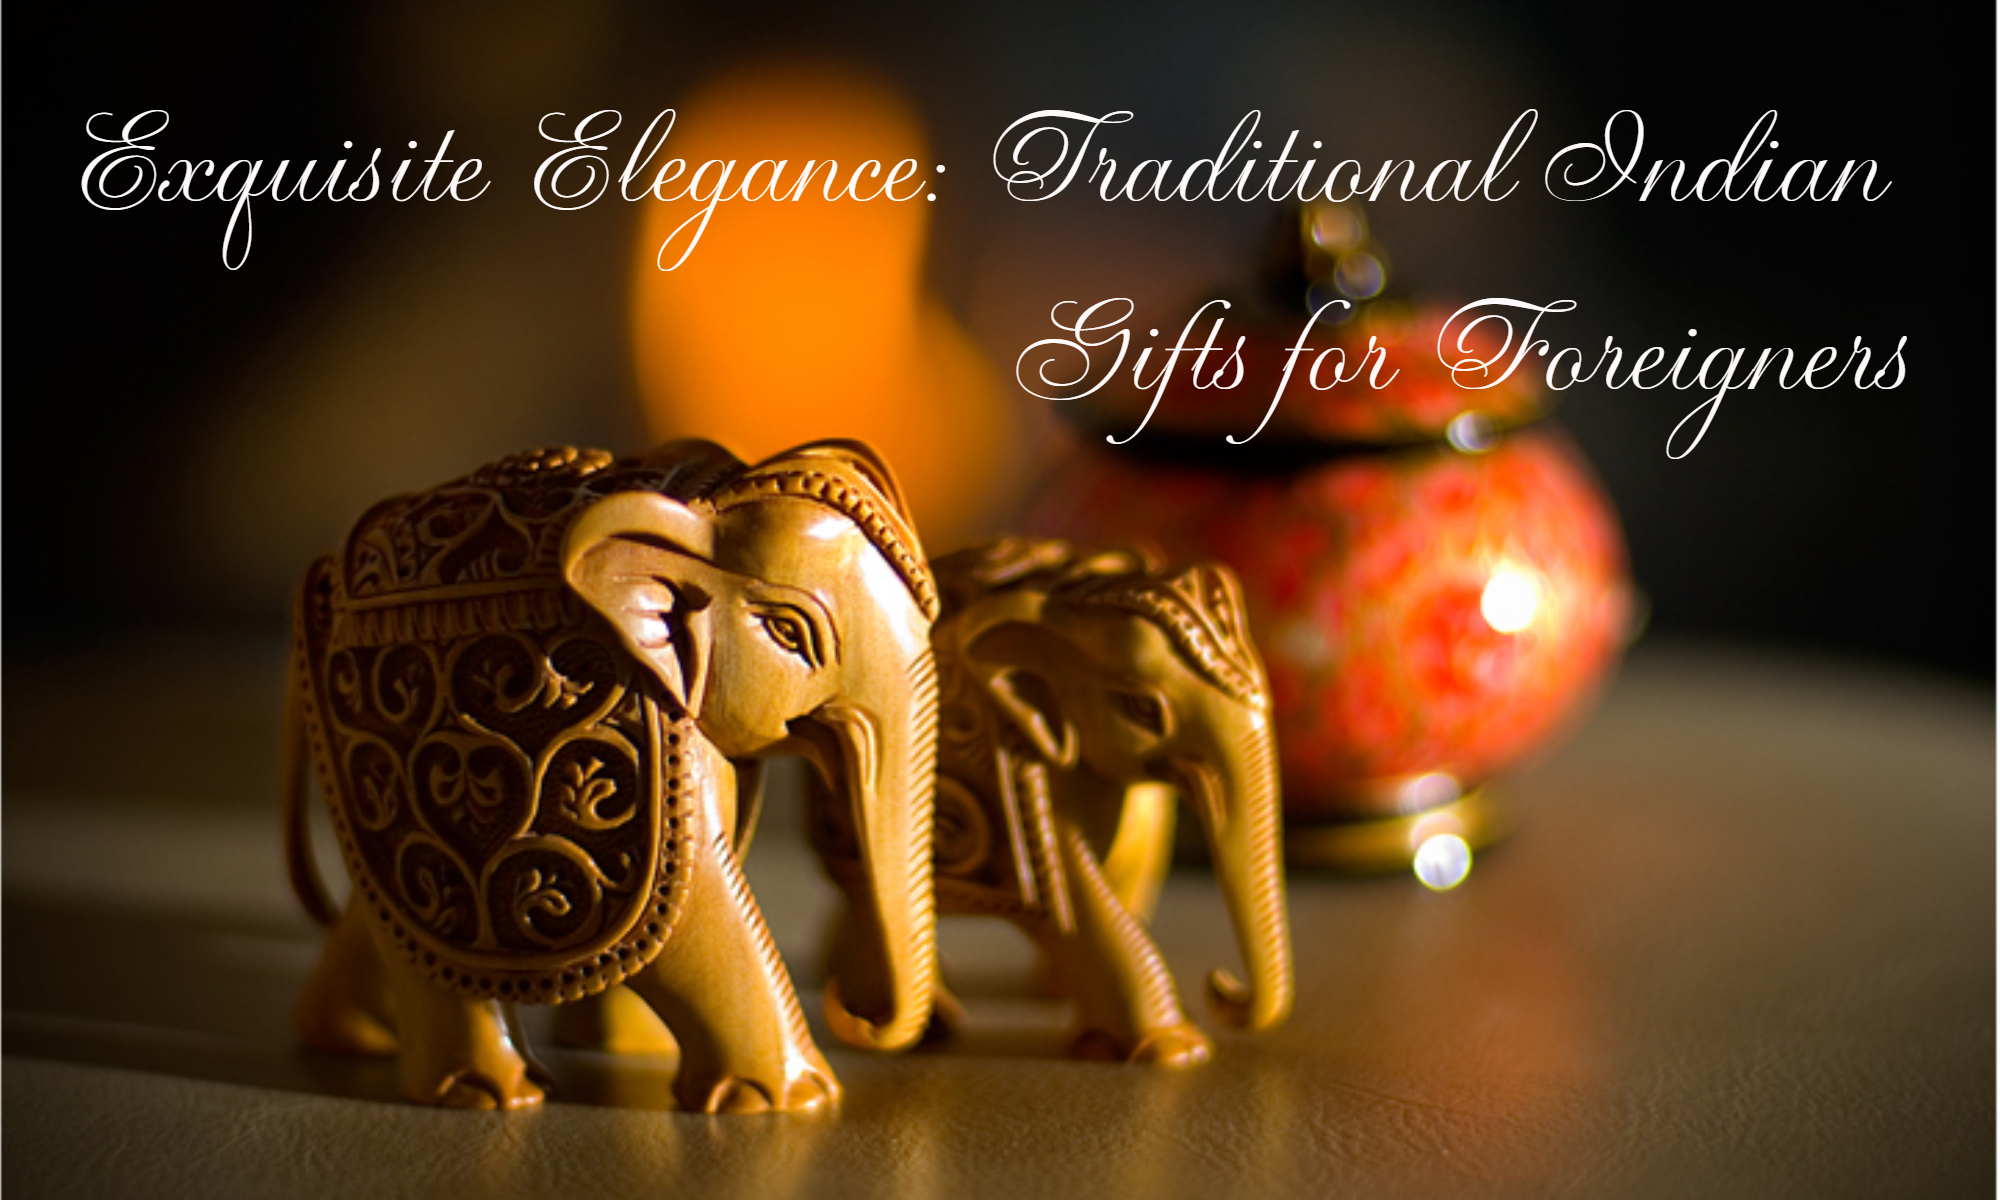 traditional indian gifts for foreigners, gifts that foreign travellers can take home from india